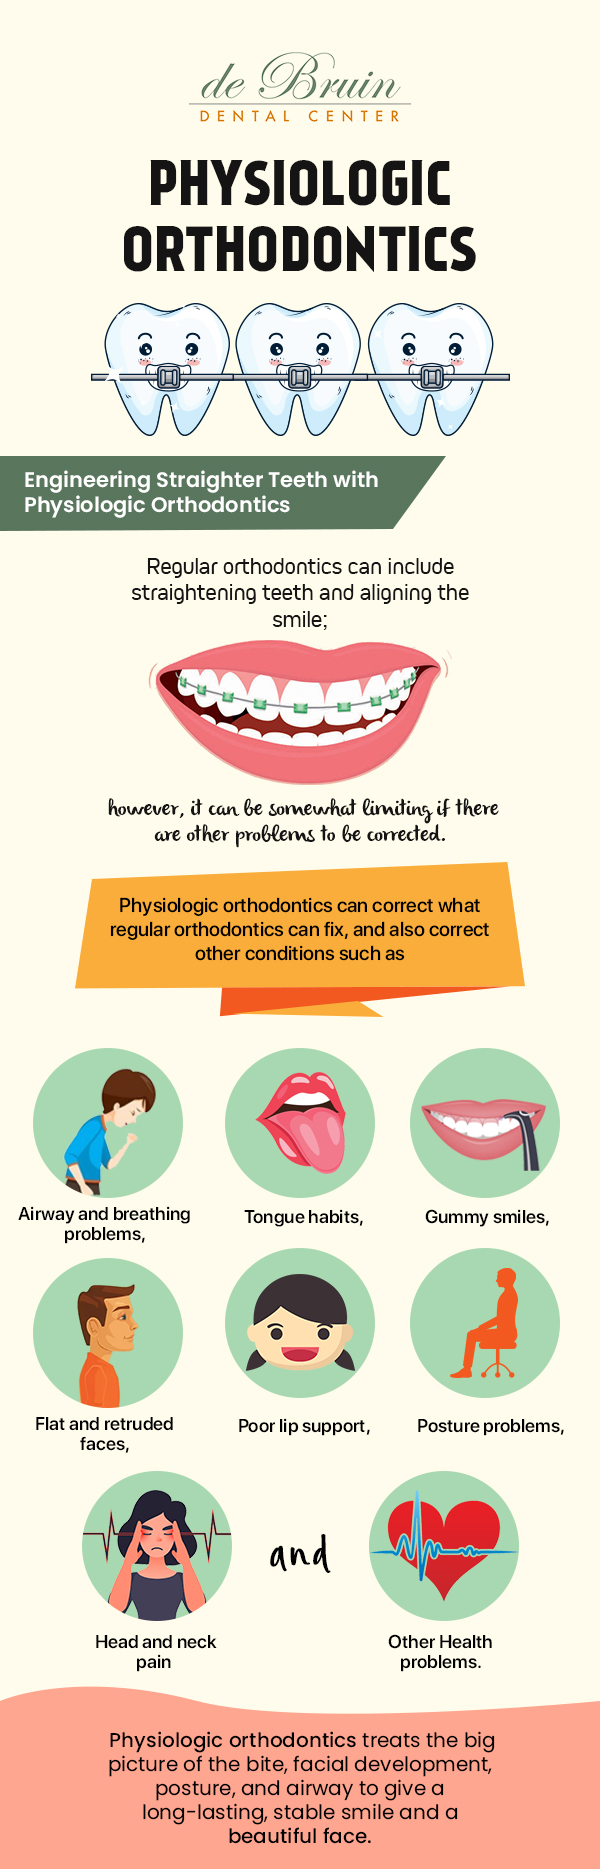 Get Straight Smile with Physiologic Orthodontics in Reno, NV from de Bruin Dental Center